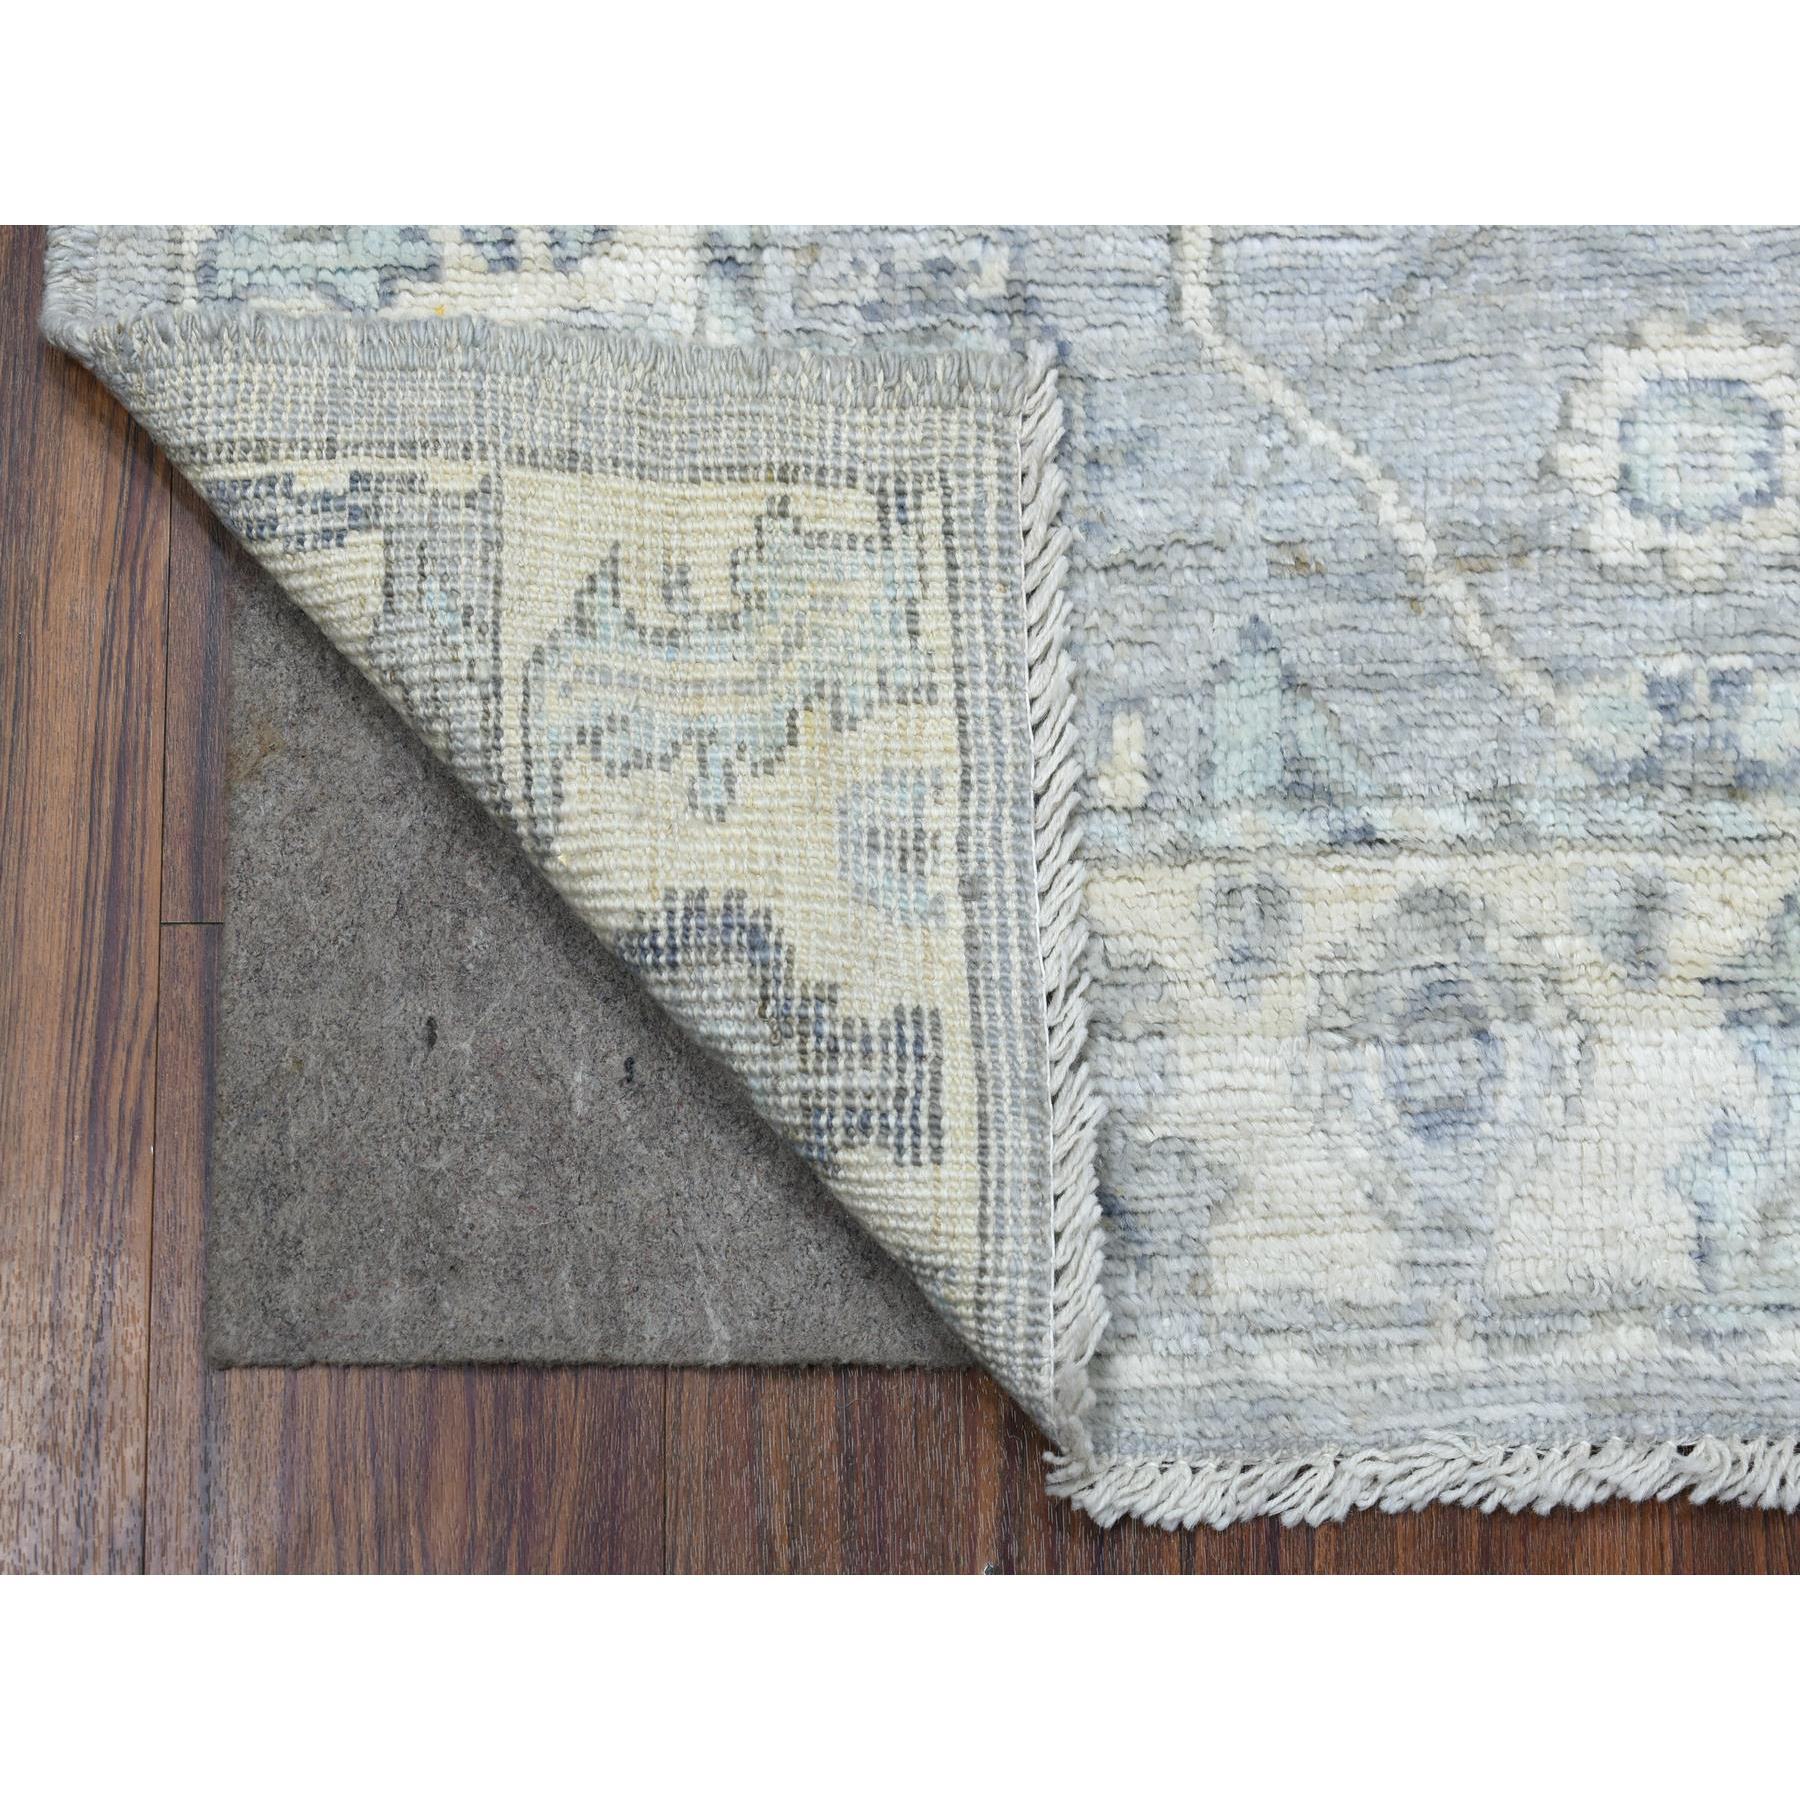 3'3"x4'10" Soft and Pliable Wool Hand Woven Gray Angora Ushak with Soft Colors Oriental Rug 